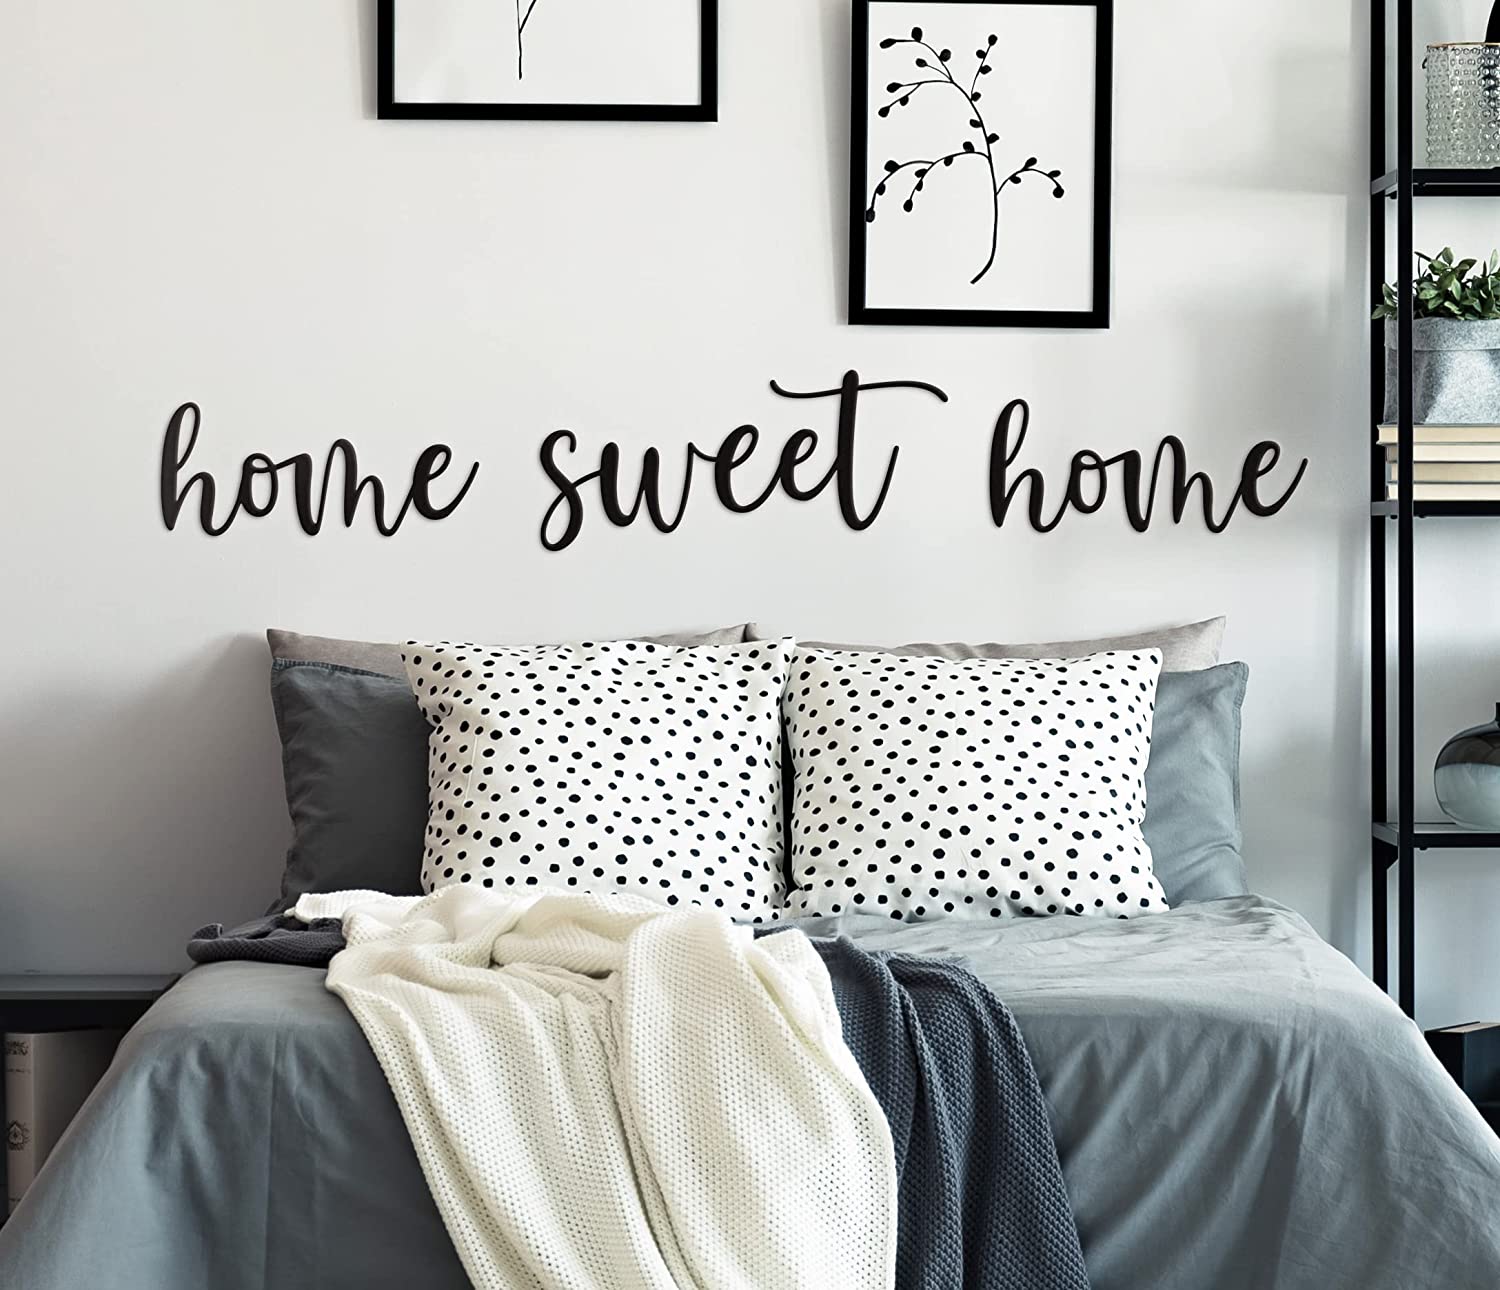 Home Sweet Home Metal Wall Decor - 18"X16" Black Modern Clearance Home Sweet Home Metal farmhouse home sign For Hanging Room Shelf Décor